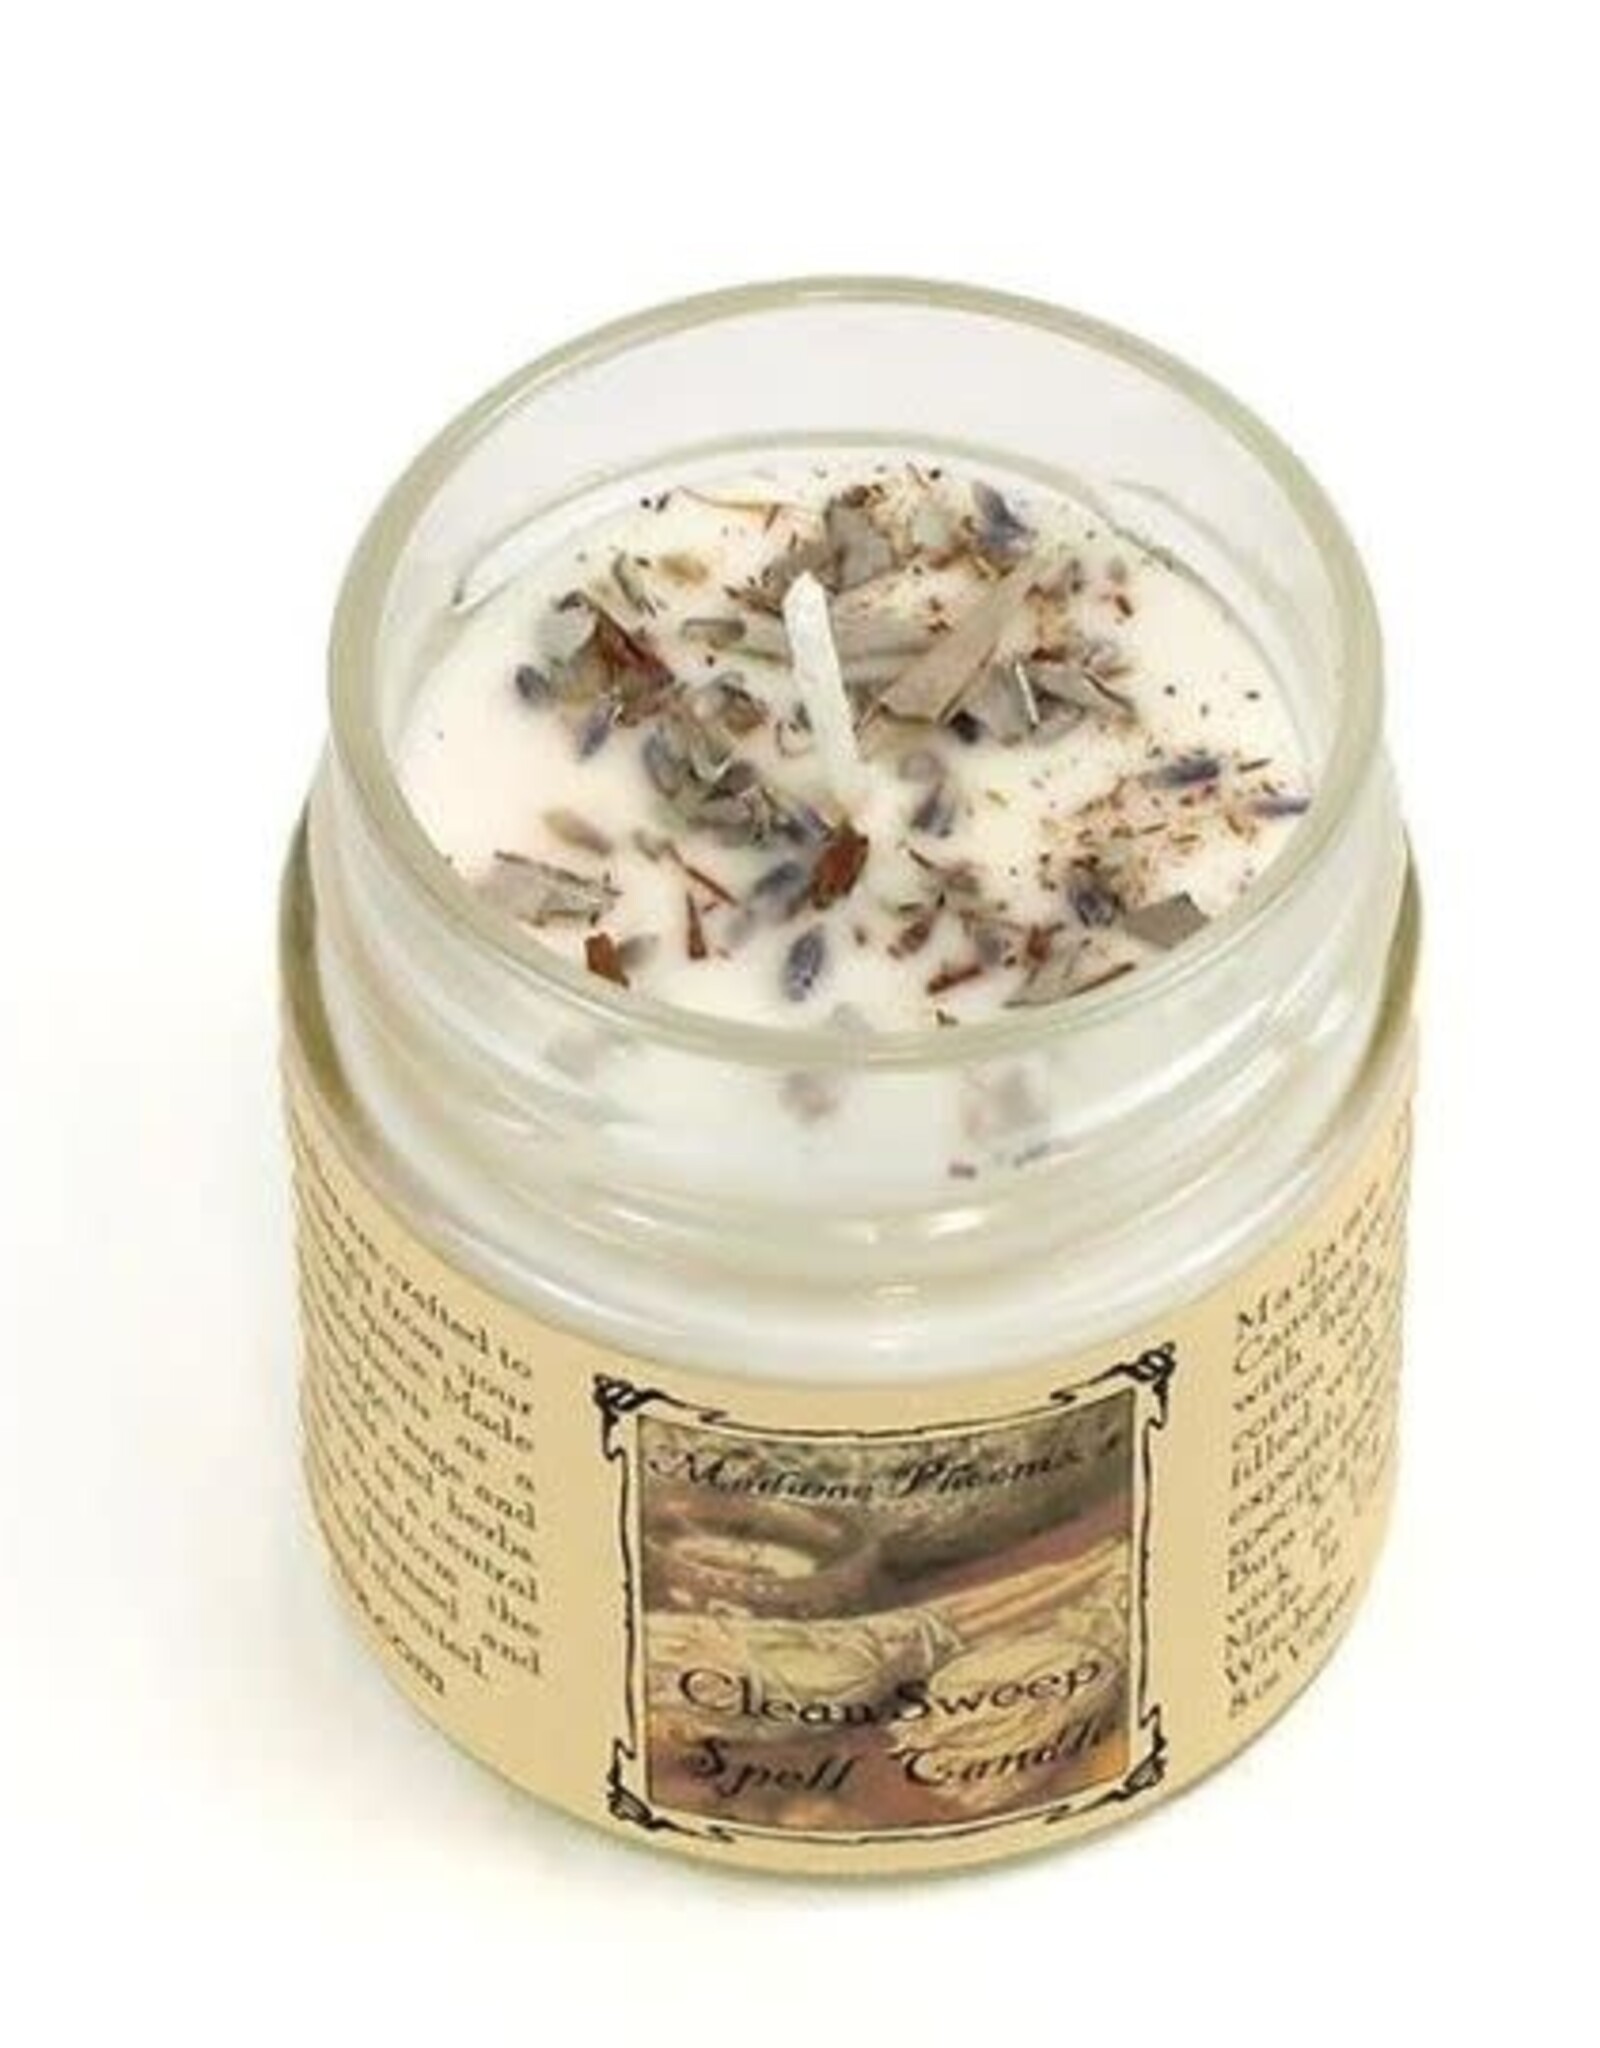 Madame Phoenix's Clean Sweep Sage Spell Candle